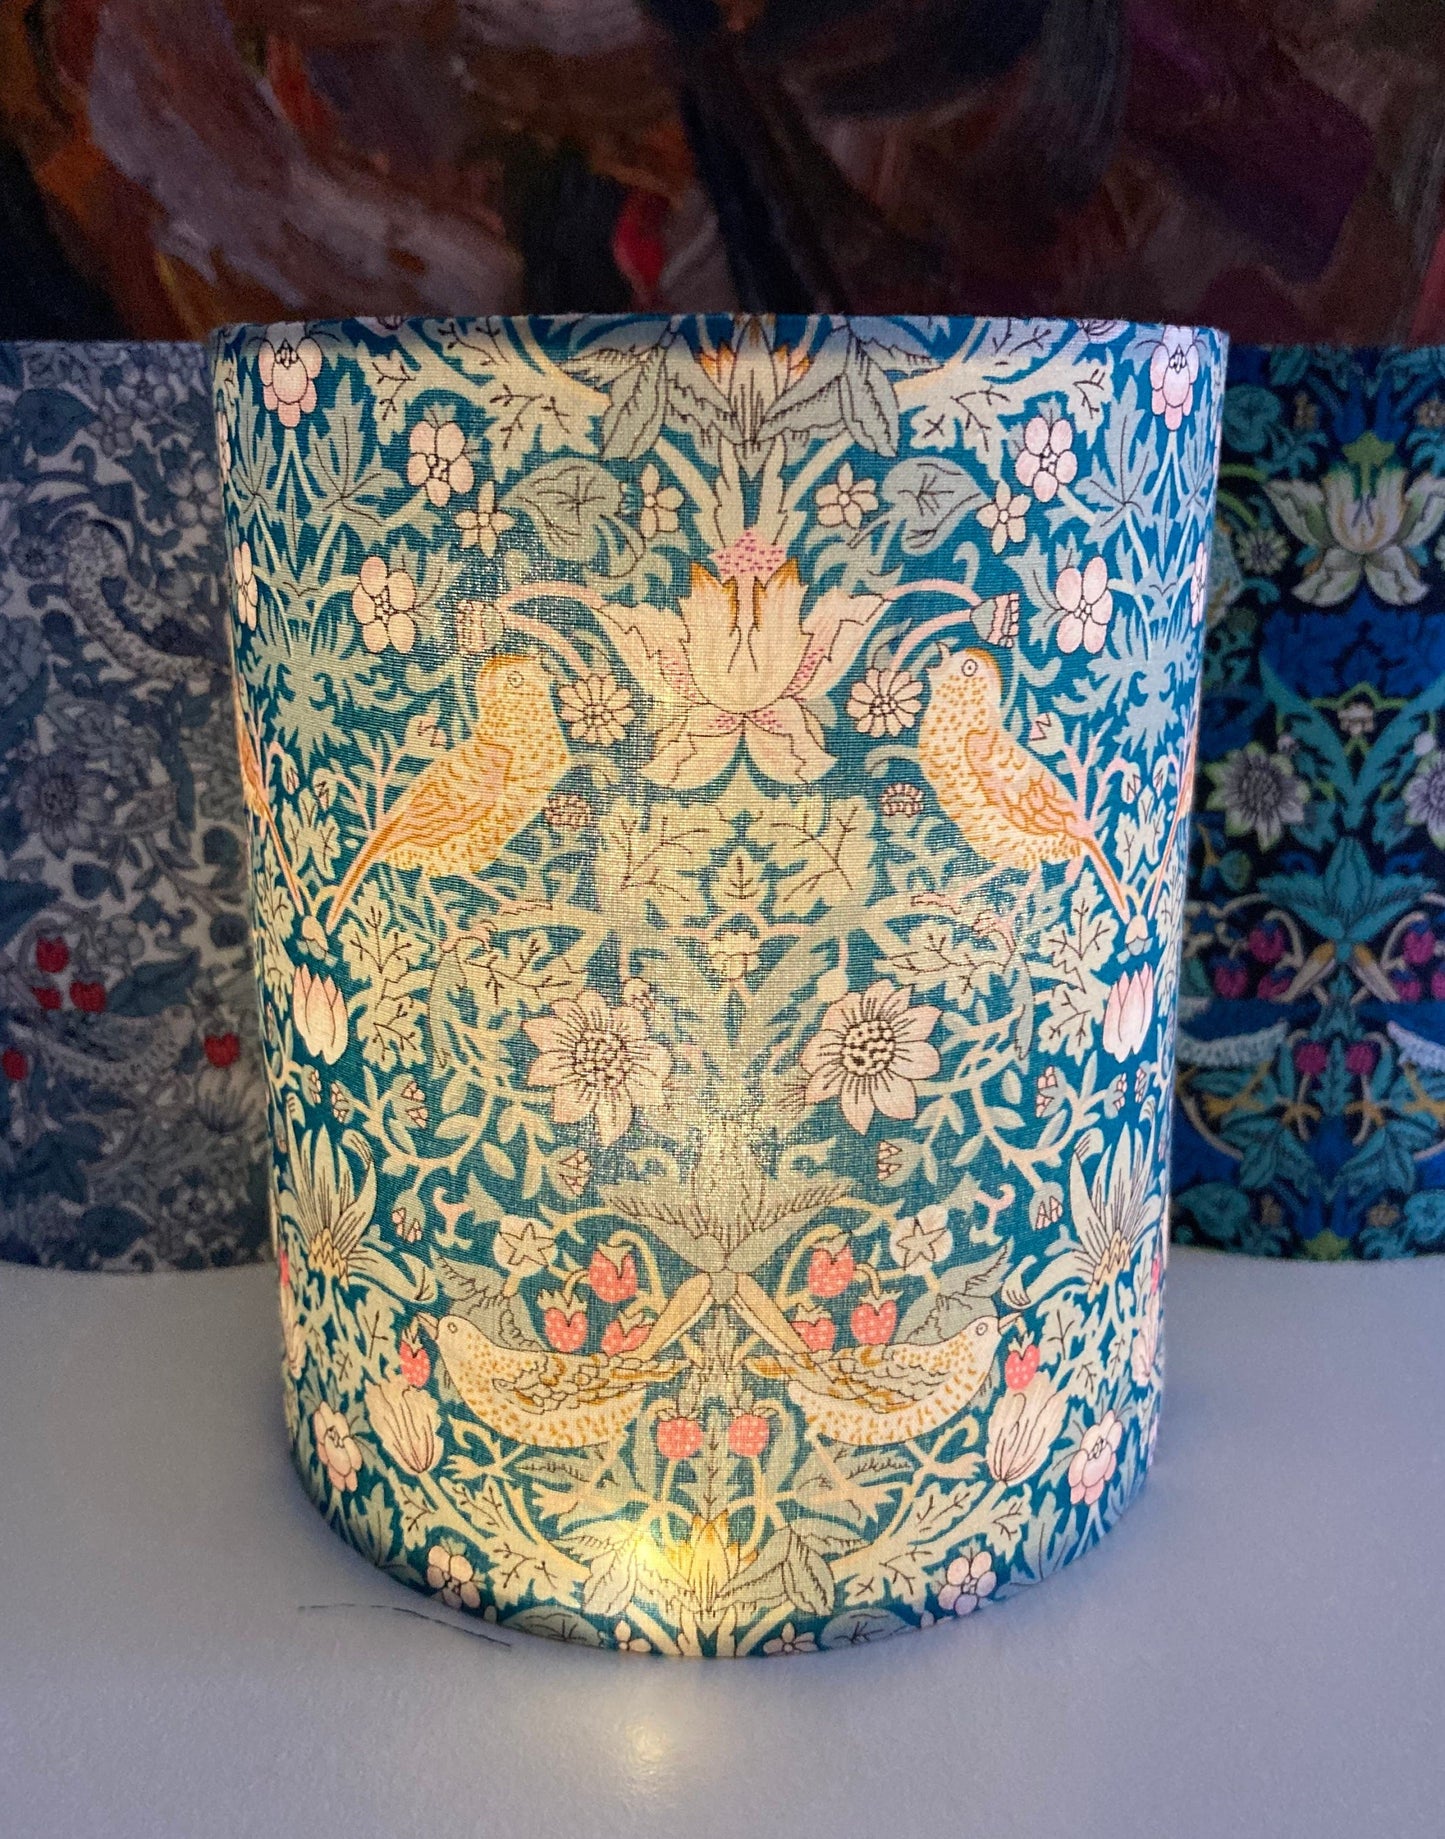 William Morris Teal and Green Strawberry Thief Fabric Handmade Lantern with Fairy Lights